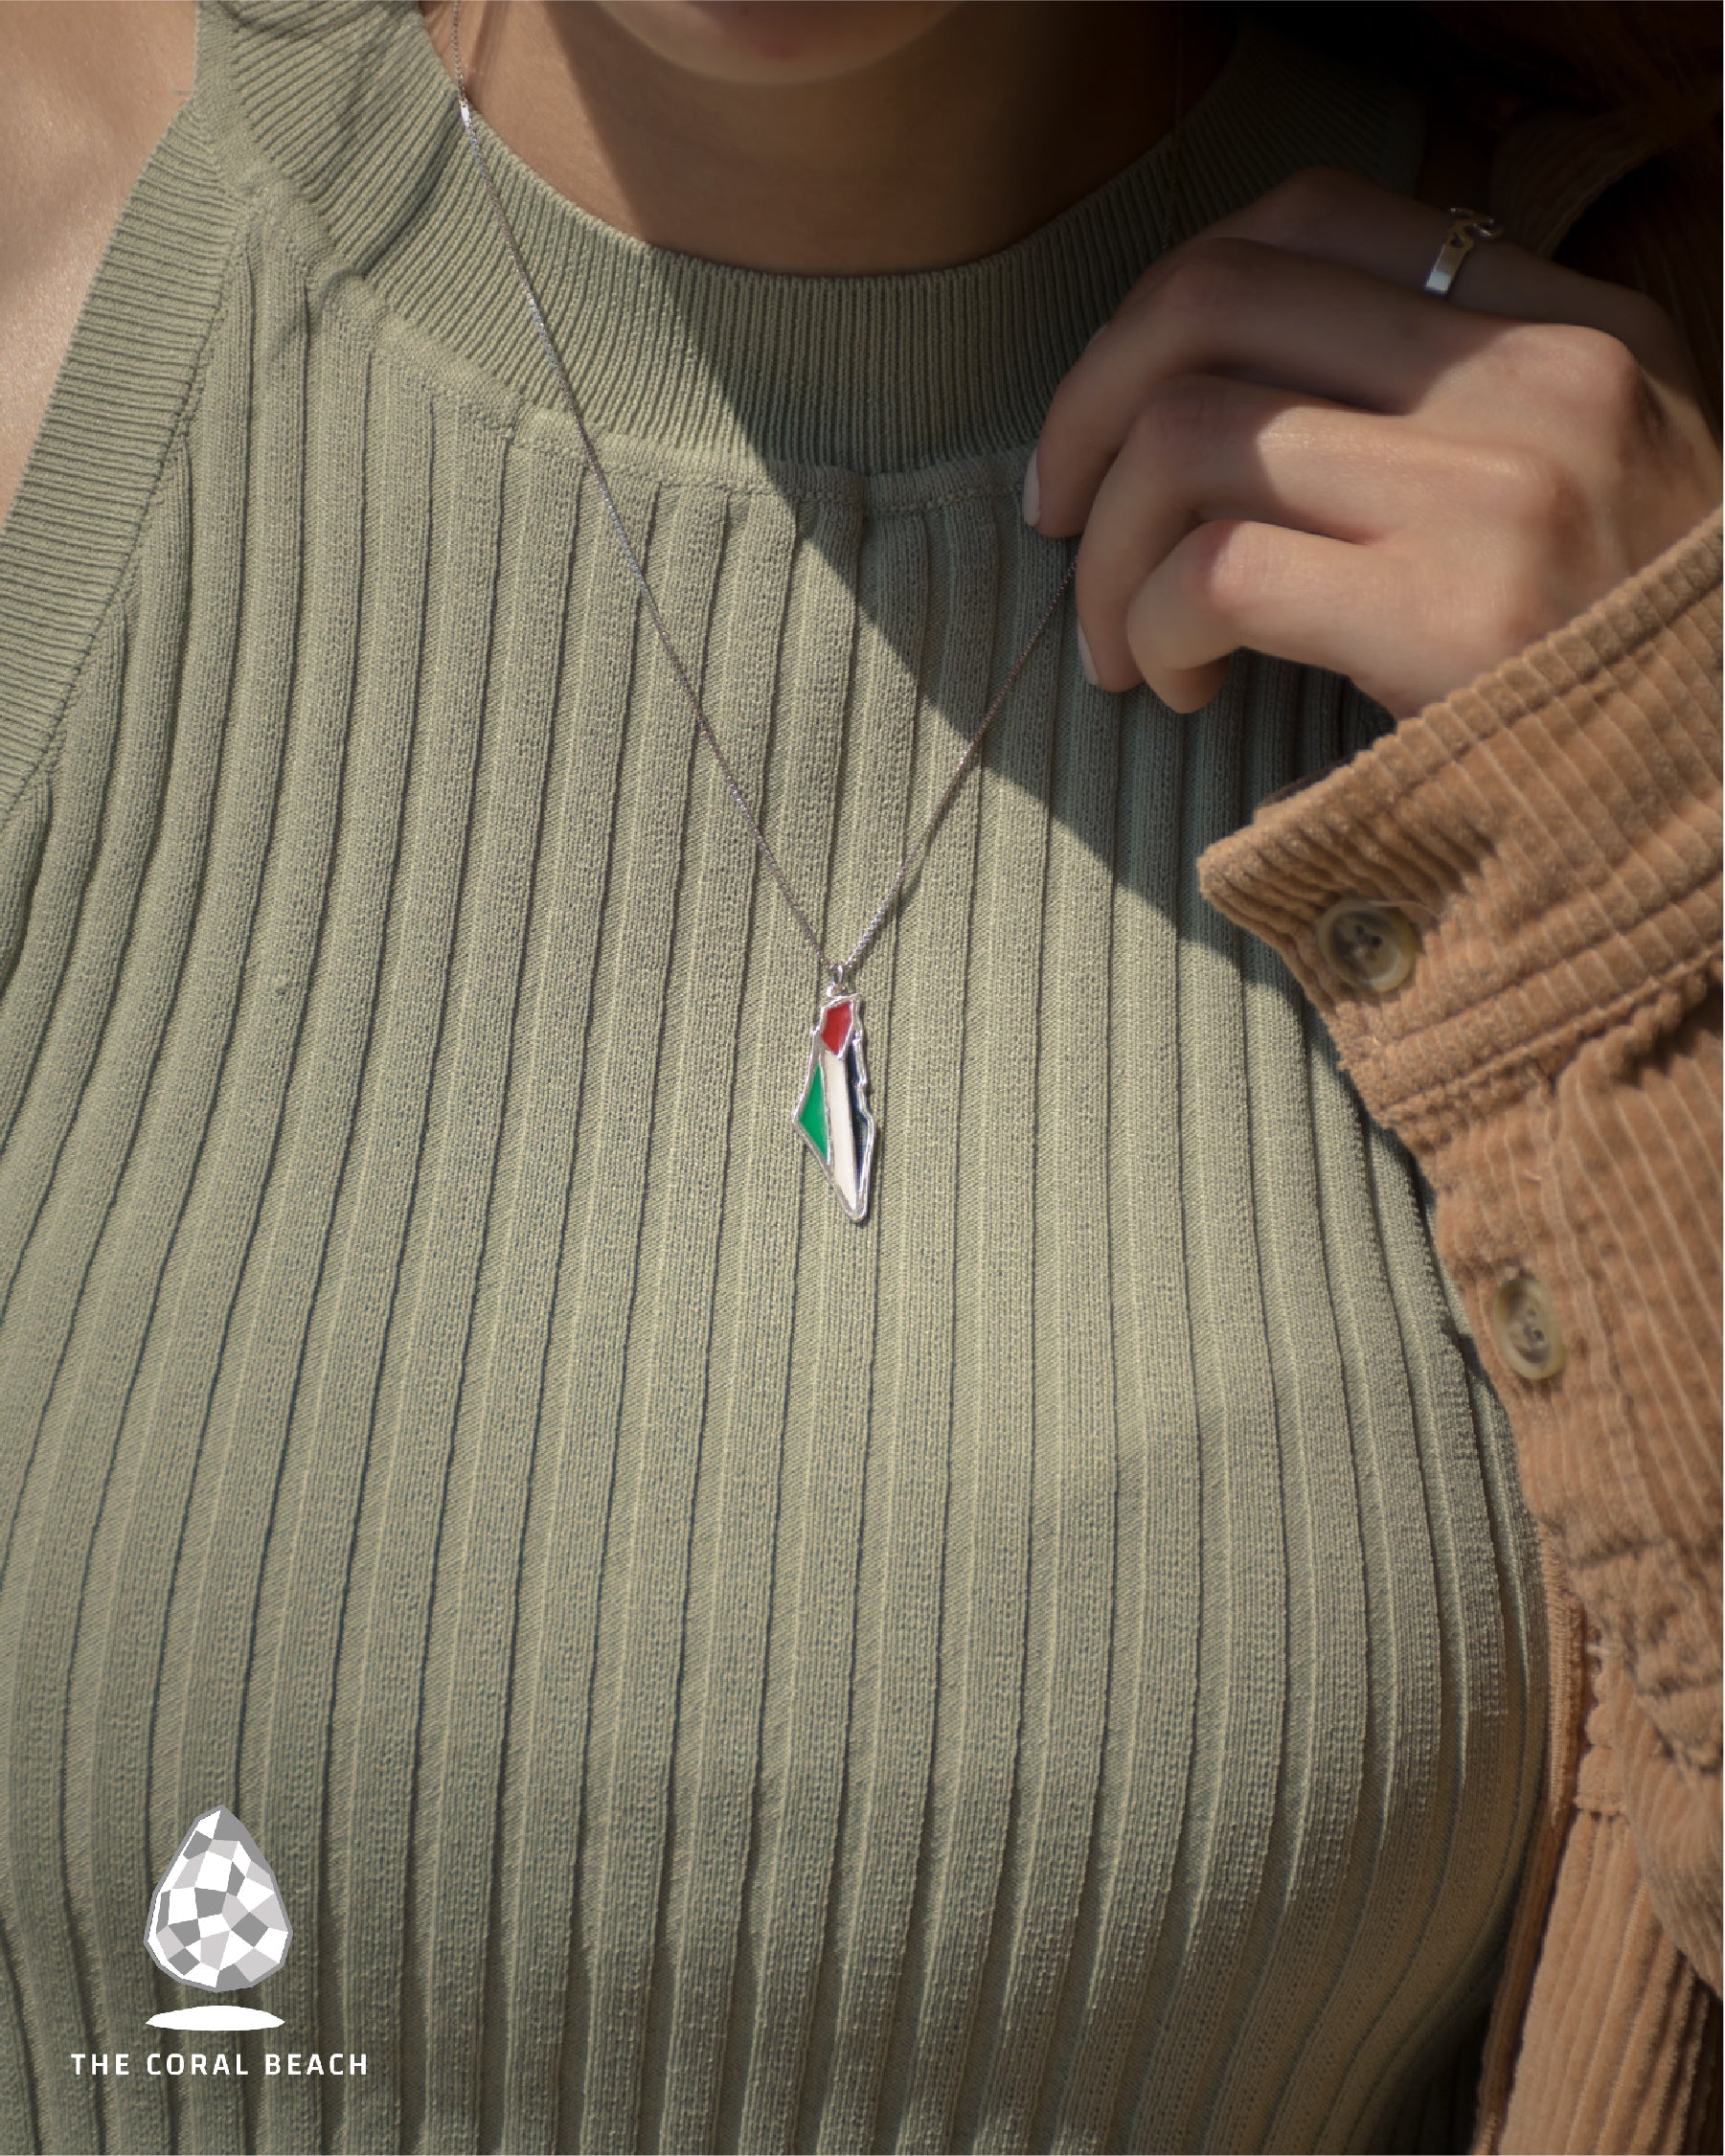 Palestine map with flag necklace